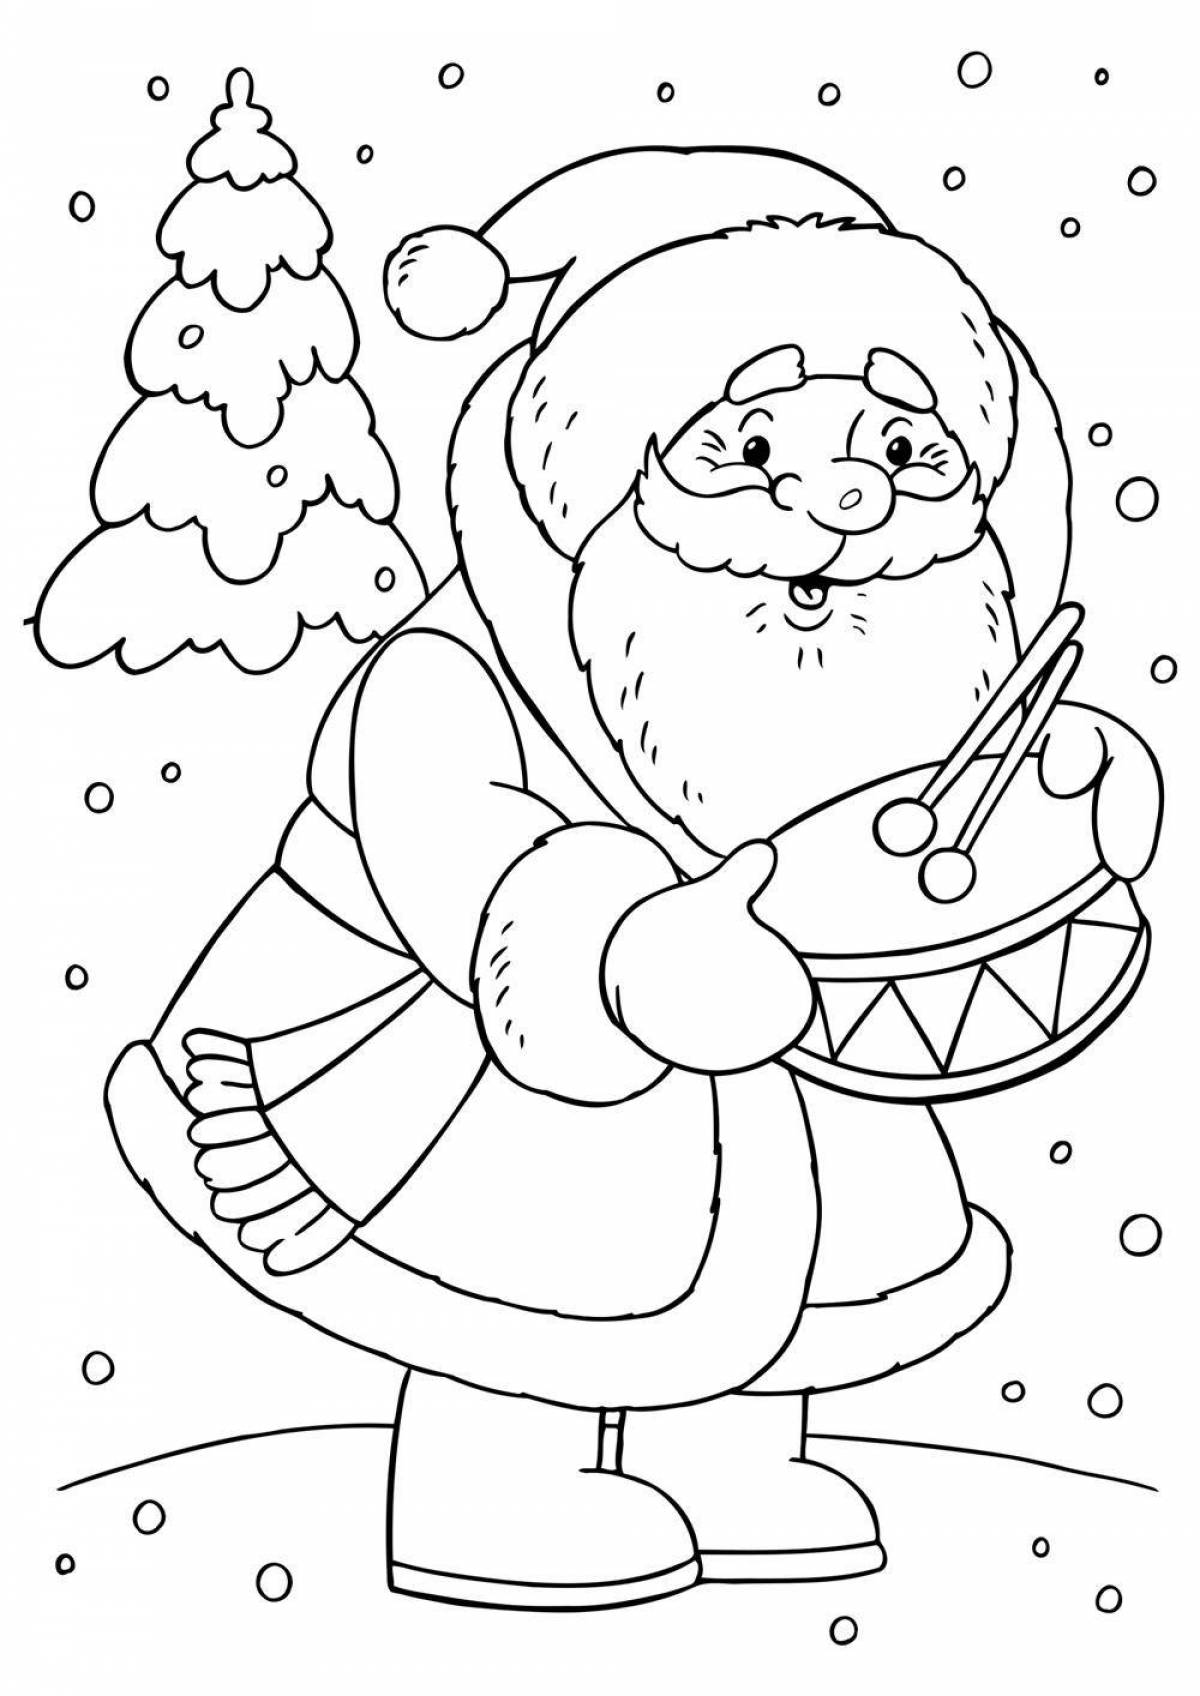 Christmas coloring pages for kids